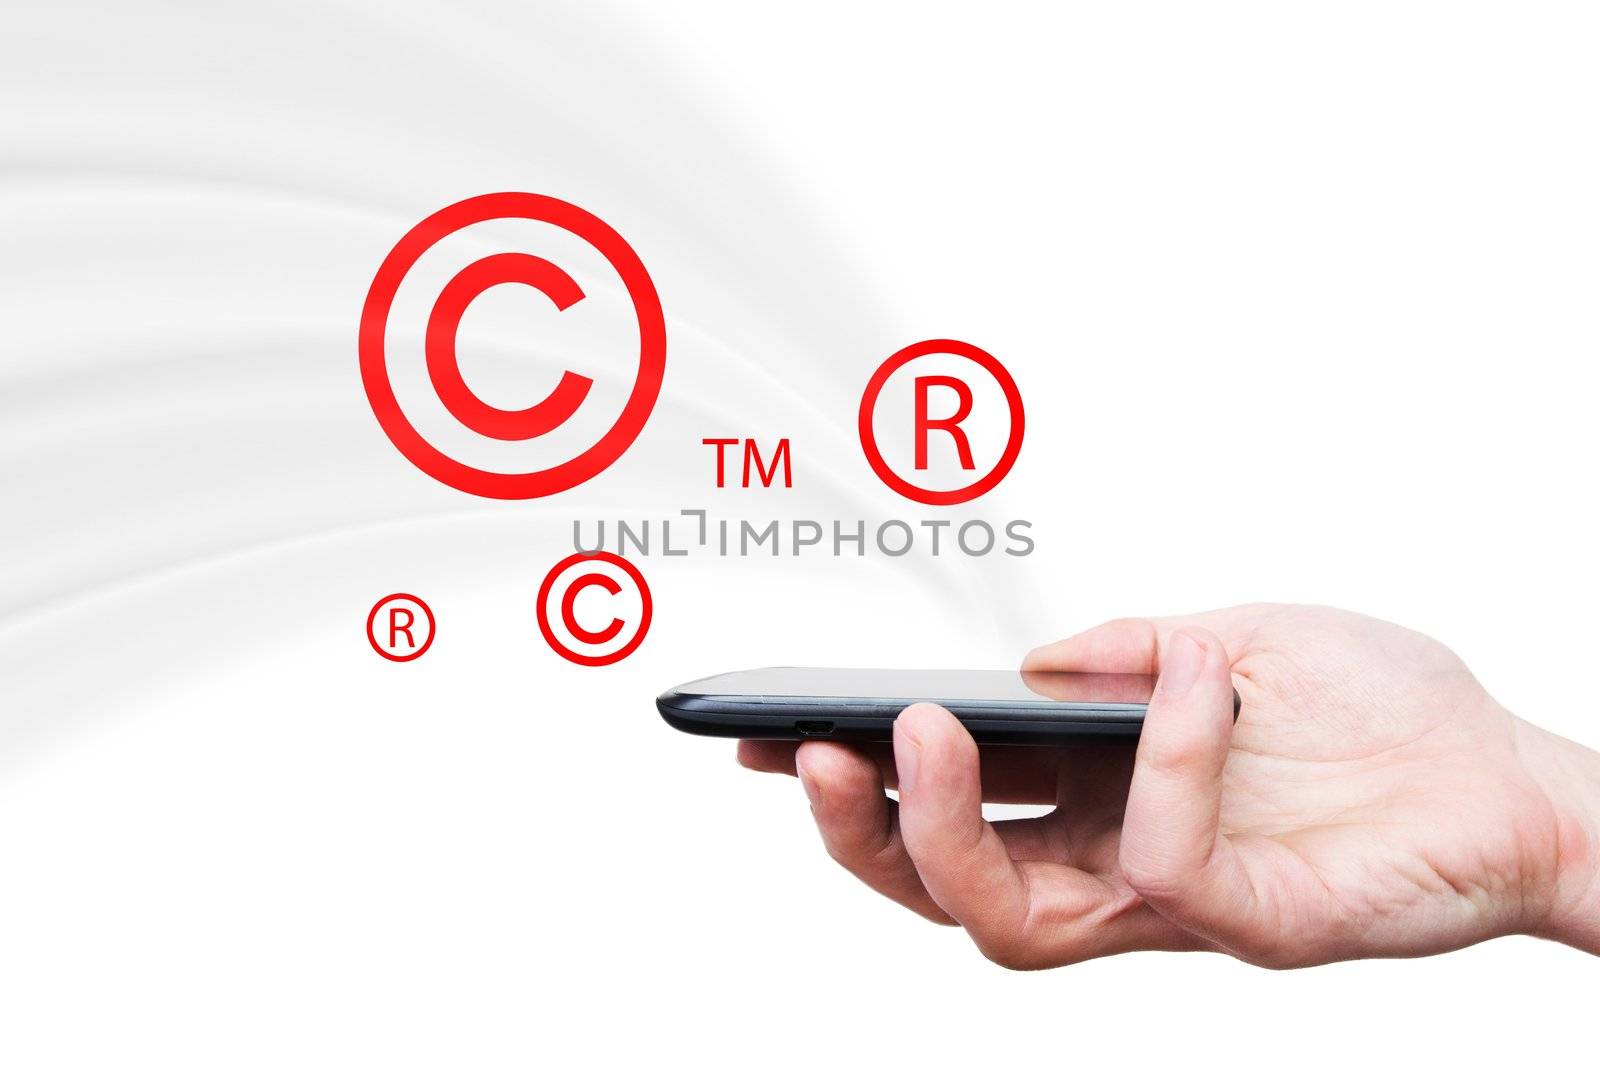 Copyright, trademark symbols flying from smartphone by simpson33